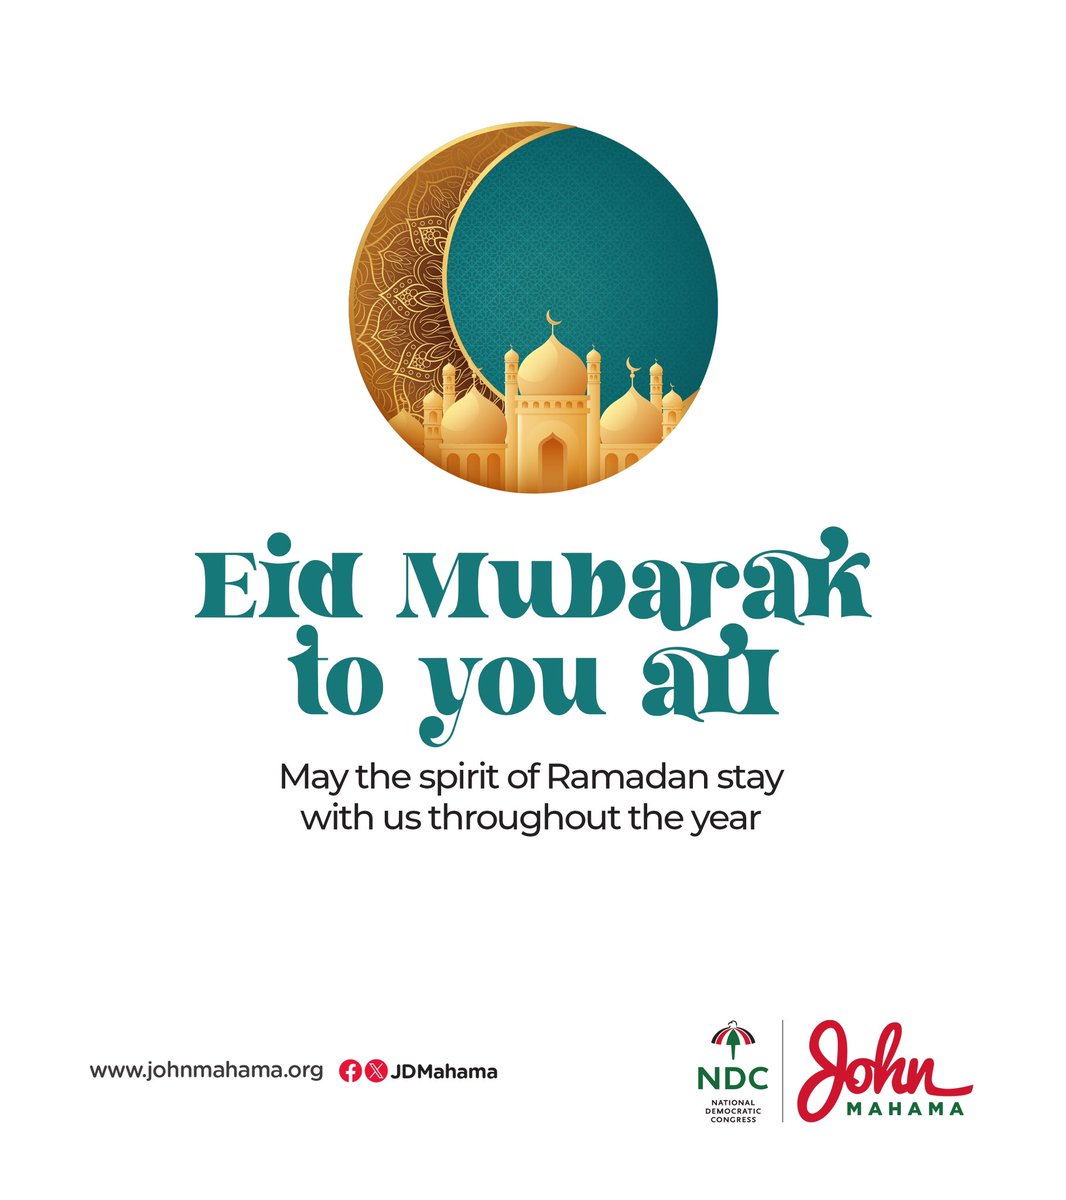 Eid Mubarak to all our Muslim brothers and sisters, both in Ghana and all around the world. My sincere wish is that the enduring lessons of patience, discipline, and empathy that were learnt during Ramadan will continue to inspire and guide us as a people. May this special…